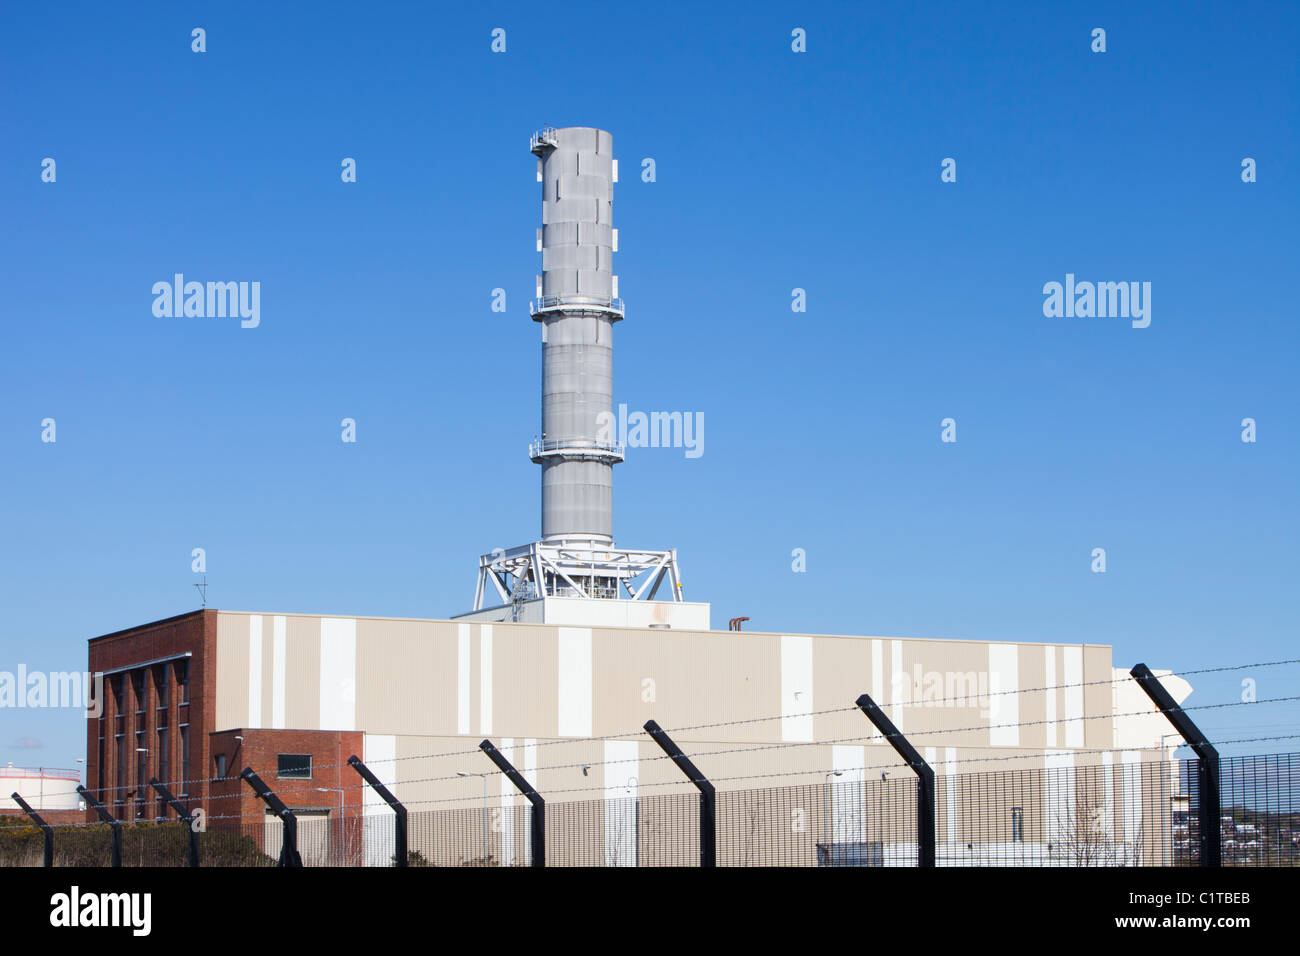 Roose, gas powered power station which uses natural gas from the Morecambe Bay gas field, Barrow in Furness, Cumbria, UK. Stock Photo